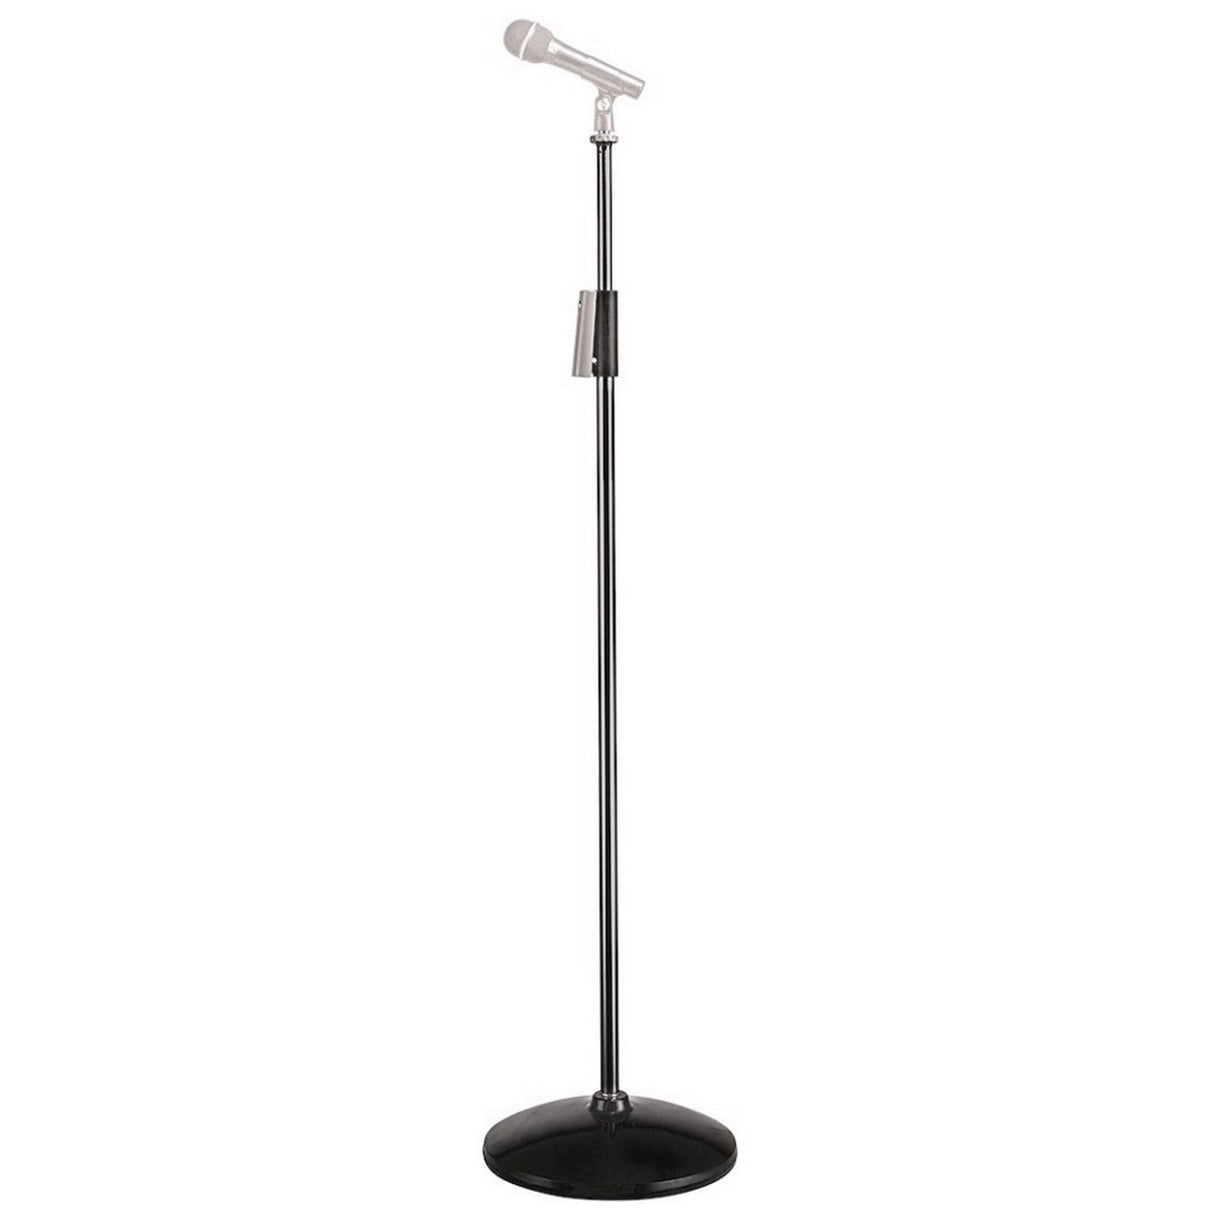 Manfrotto 622B Aluminum Microphone Stand, Black